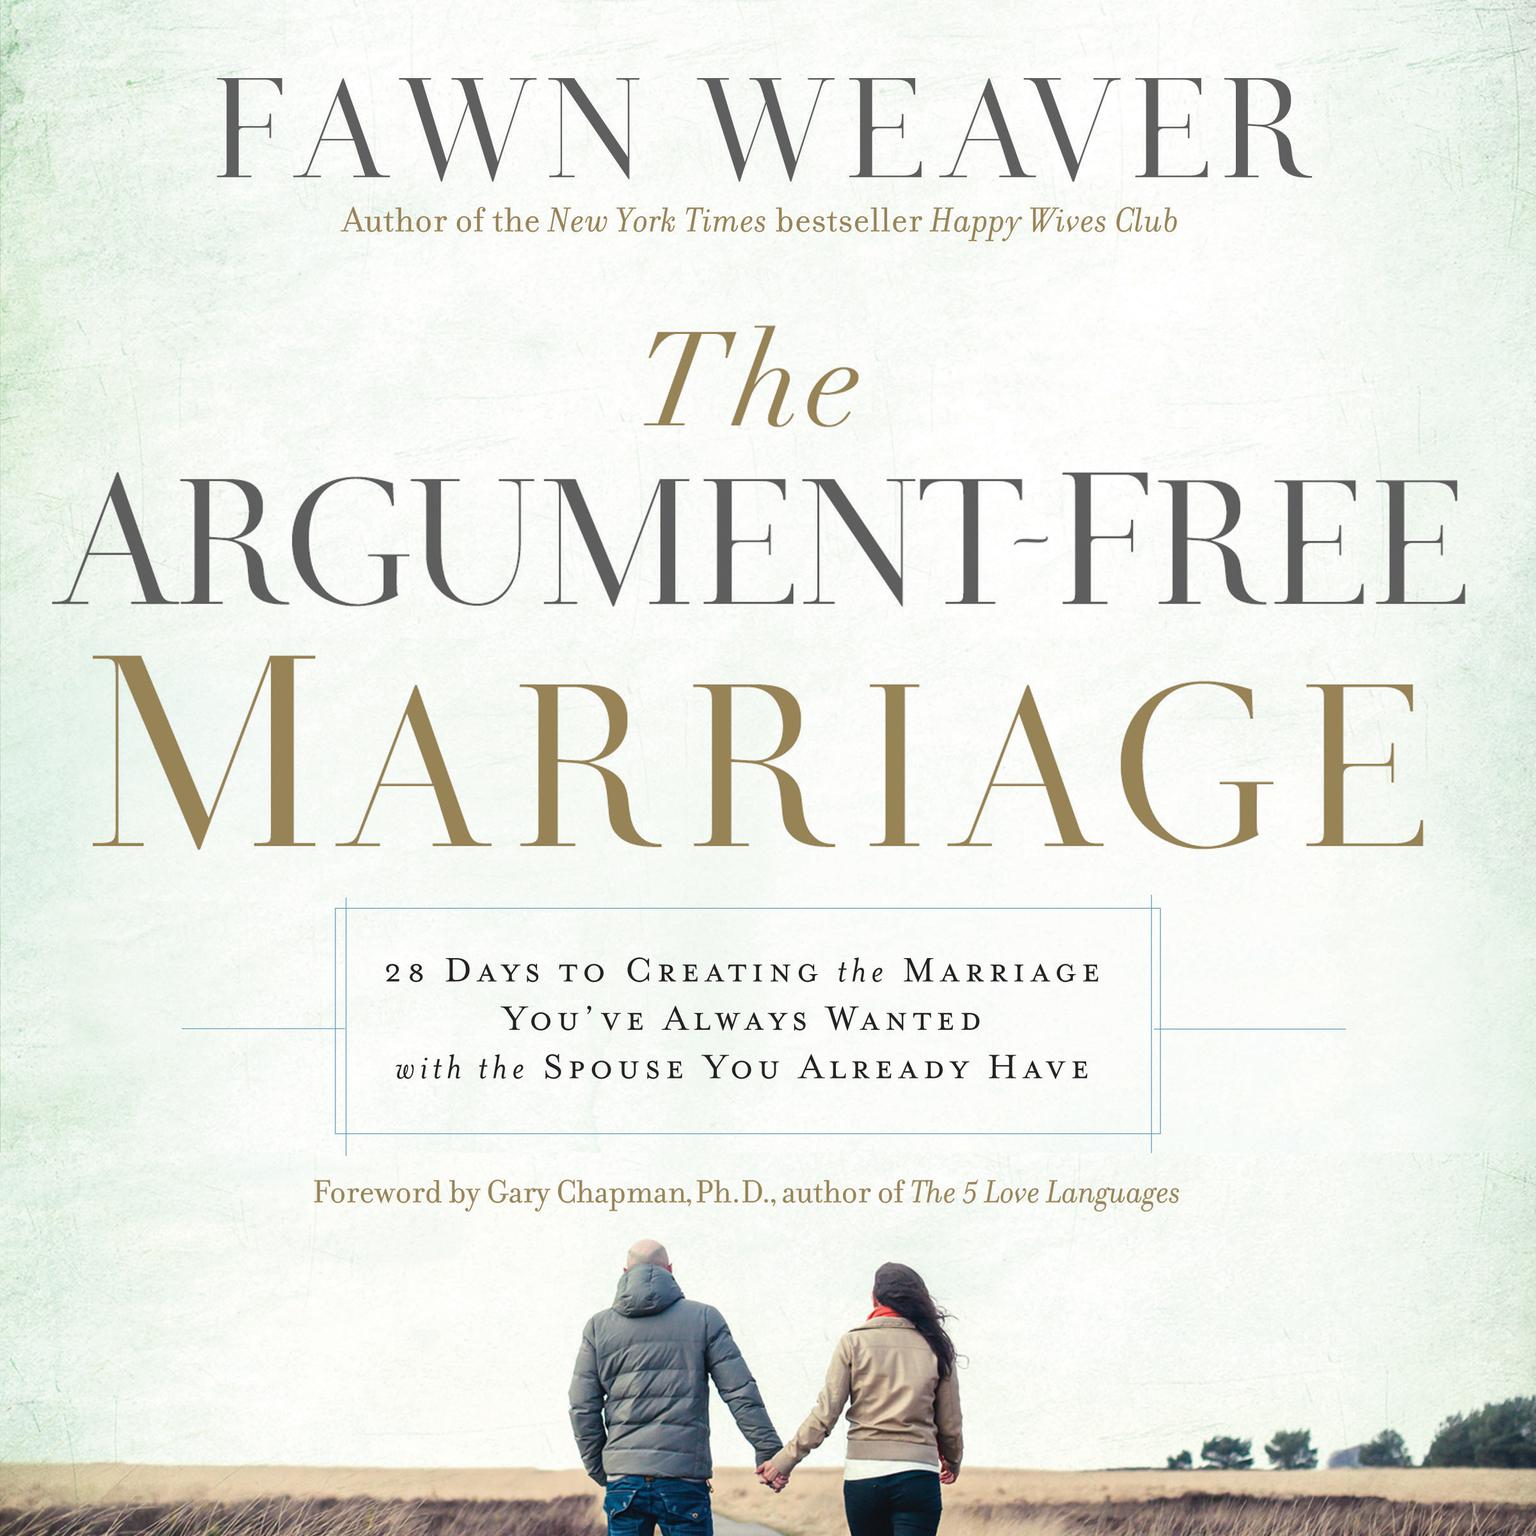 The Argument-Free Marriage: 28 Days to Creating the Marriage Youve Always Wanted with the Spouse You Already Have Audiobook, by Fawn Weaver